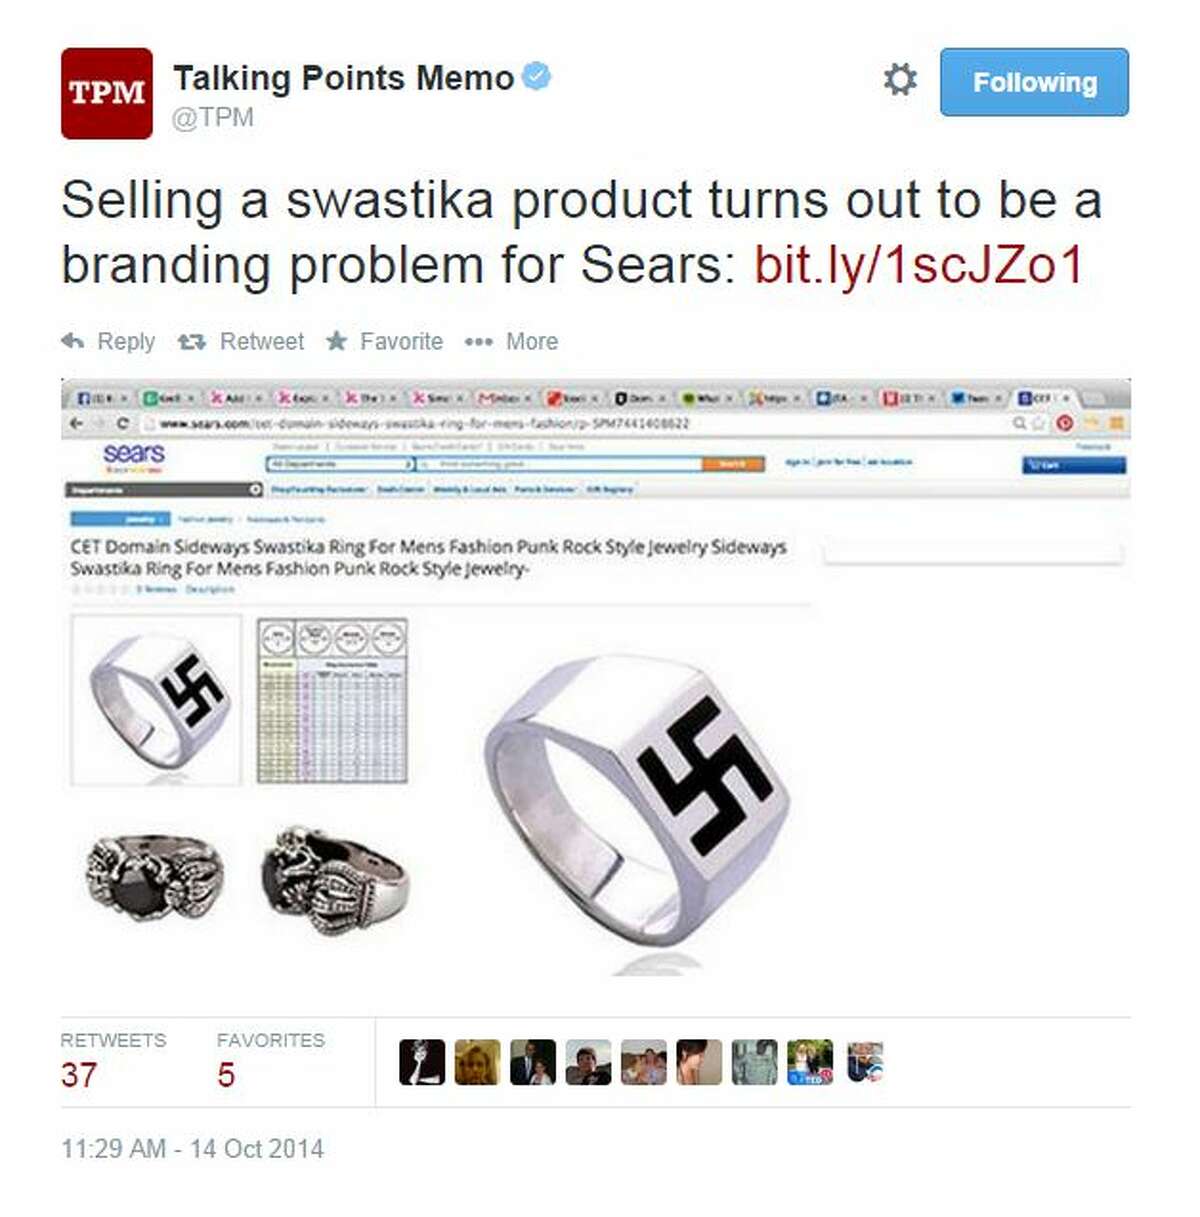 @TPM tweeted, "Selling a swastika product turns out to be a branding problem for Sears."